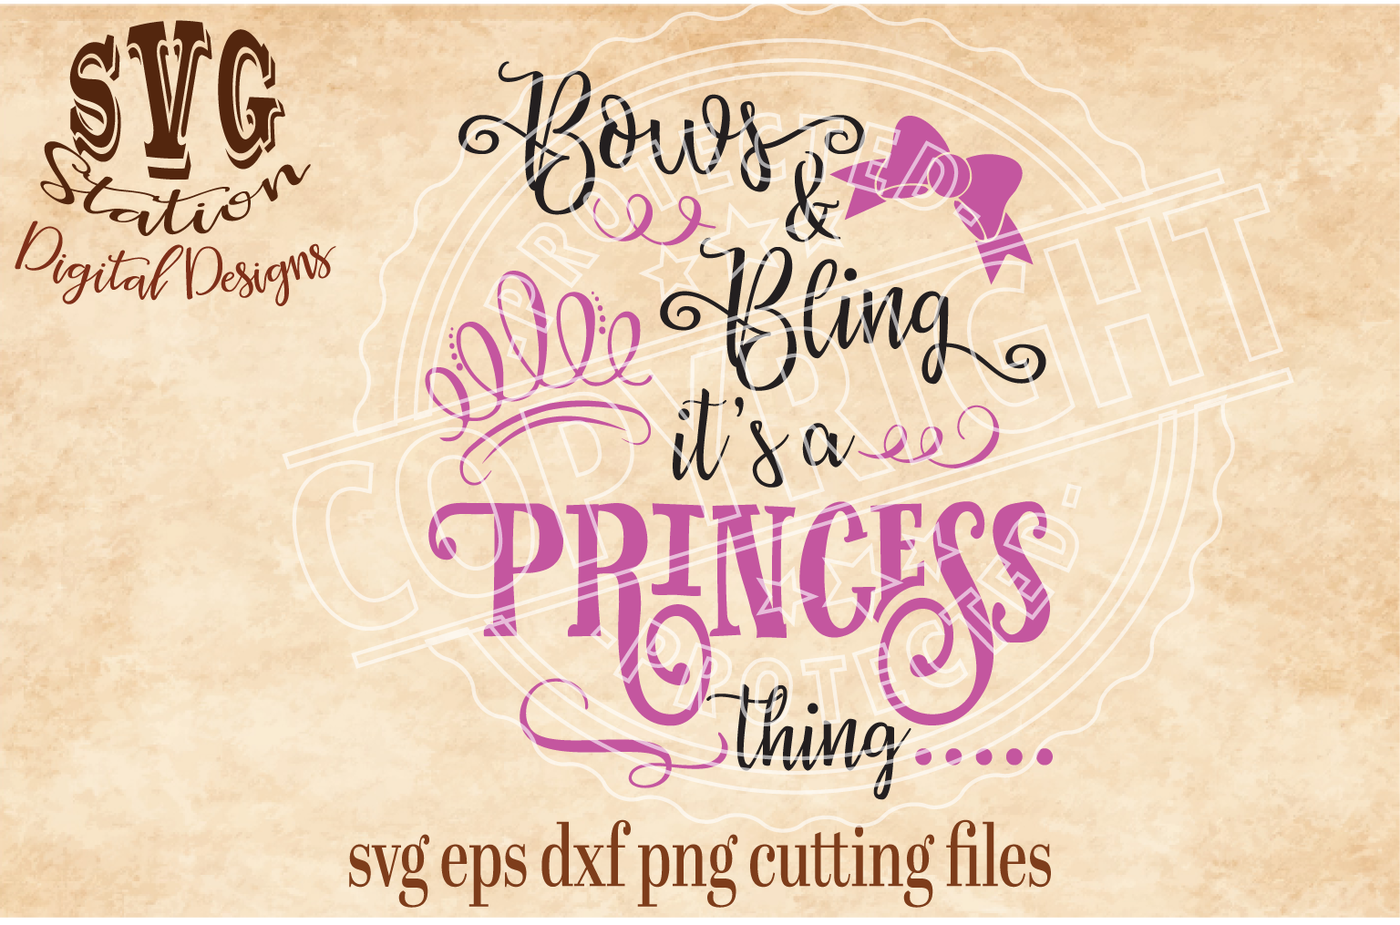 ori 55760 850c68724665d351bdb823e3978d8c0bc37ea174 bows and bling it s a princess thing svg dxf eps png cutting file silhouette cricut